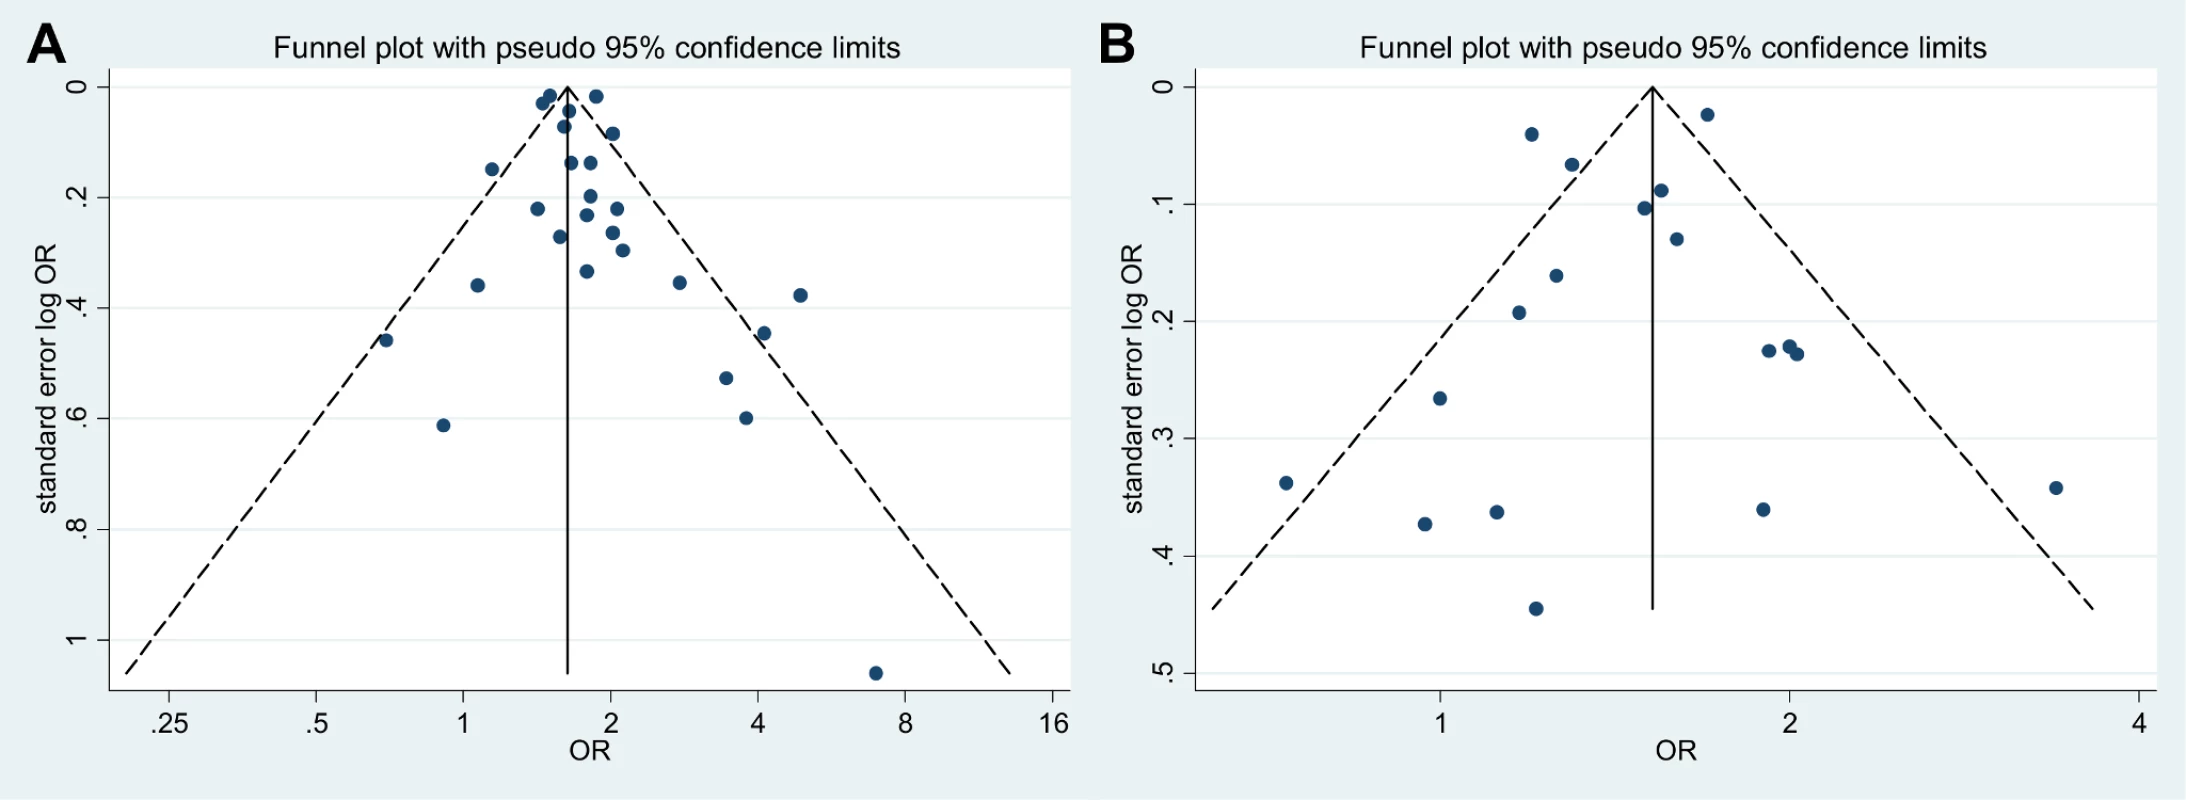 Funnel plots for studies reporting unadjusted and adjusted association measures.